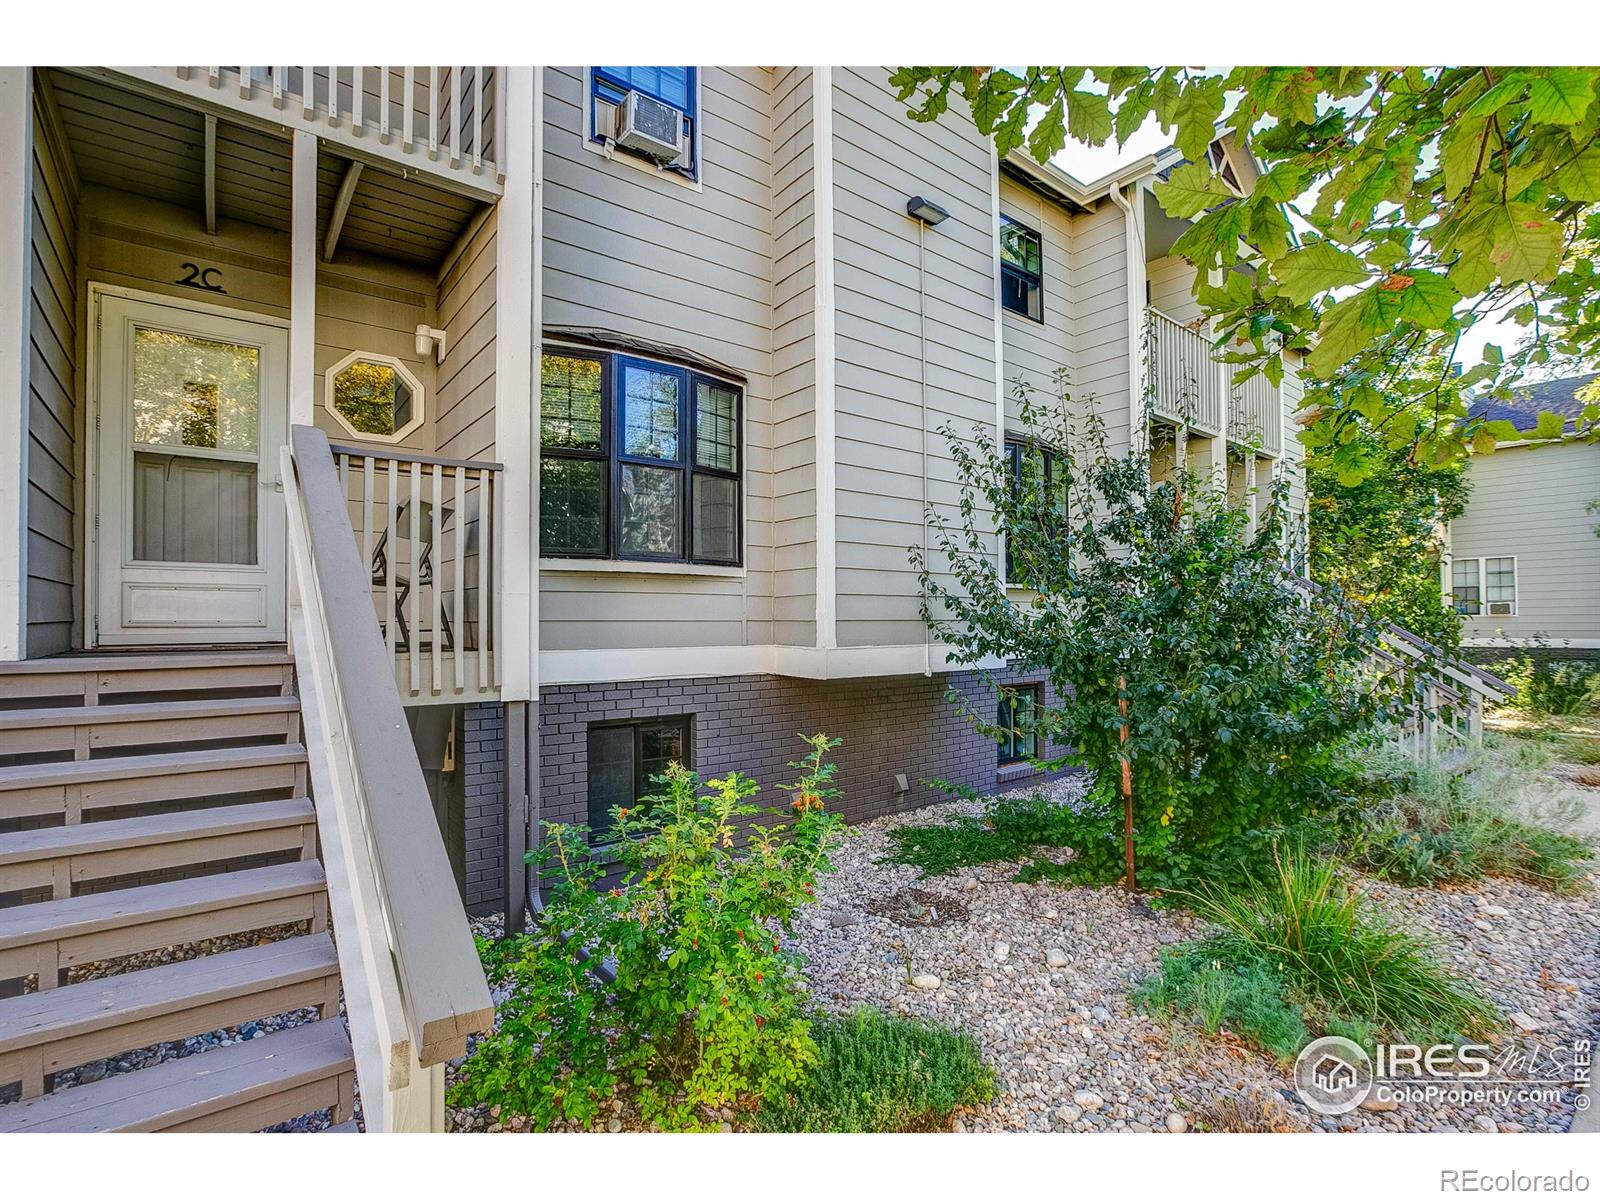 Report Image for 1717 W Drake Road,Fort Collins, Colorado